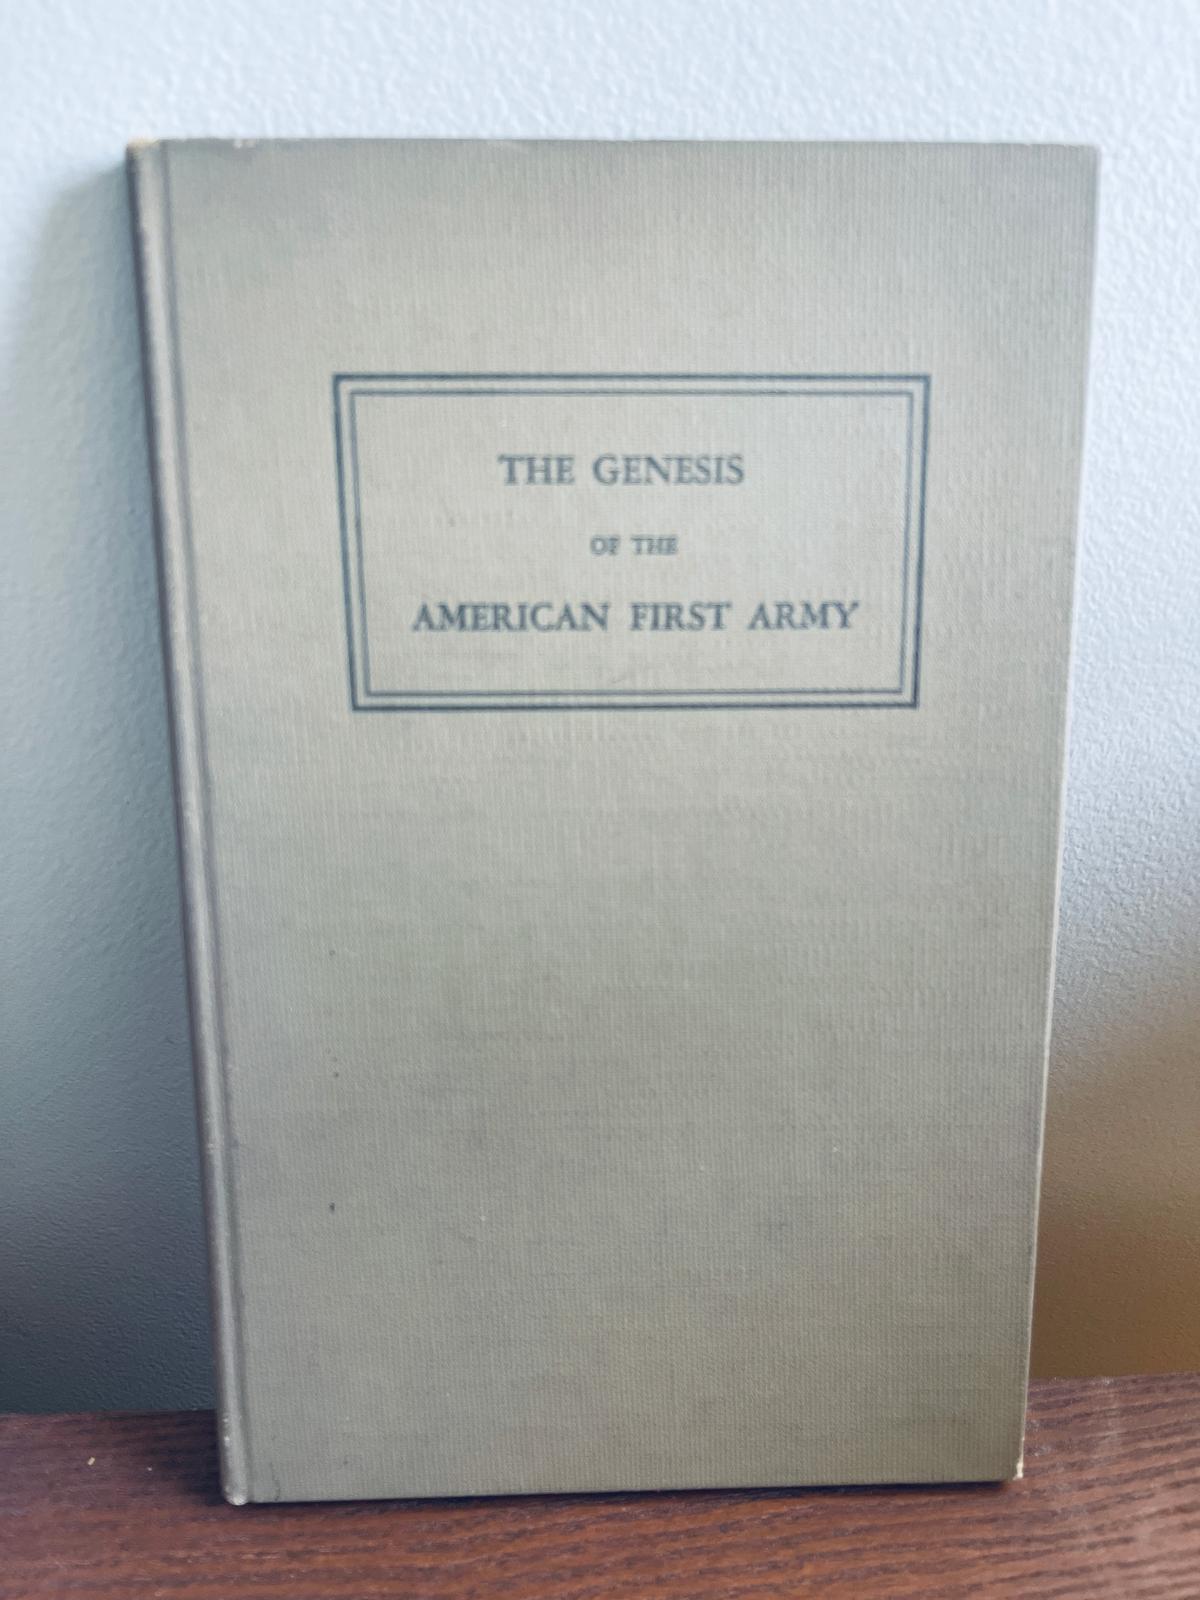 The Genesis of the First AMERICAN ARMY (1938) with General Pershing